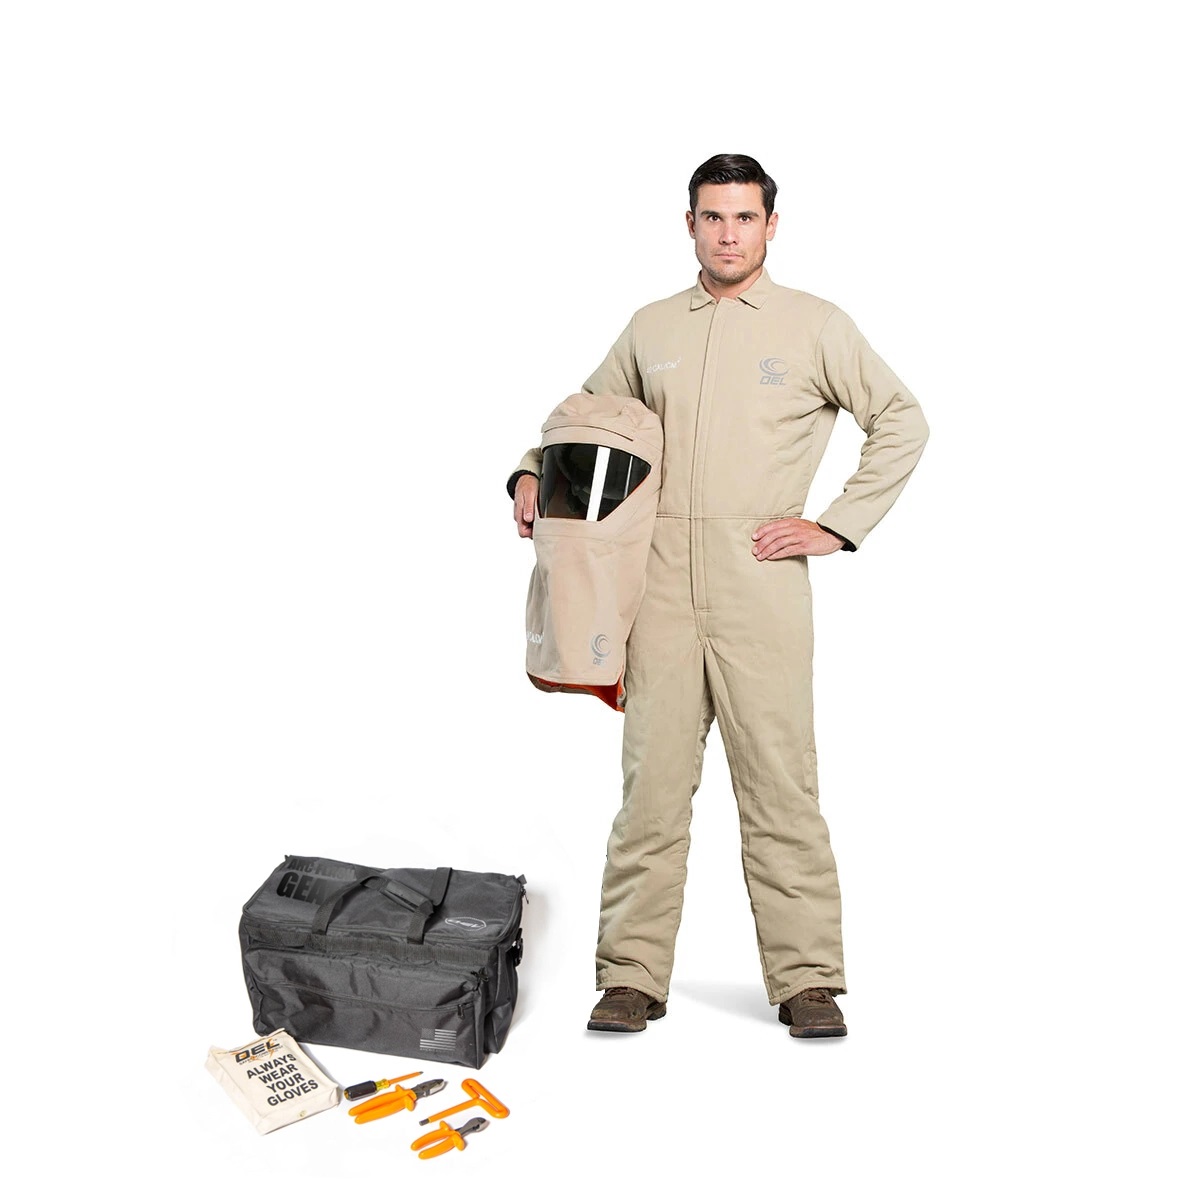 OEL 40 CAL SwitchGear Standard Coverall Kit from Columbia Safety